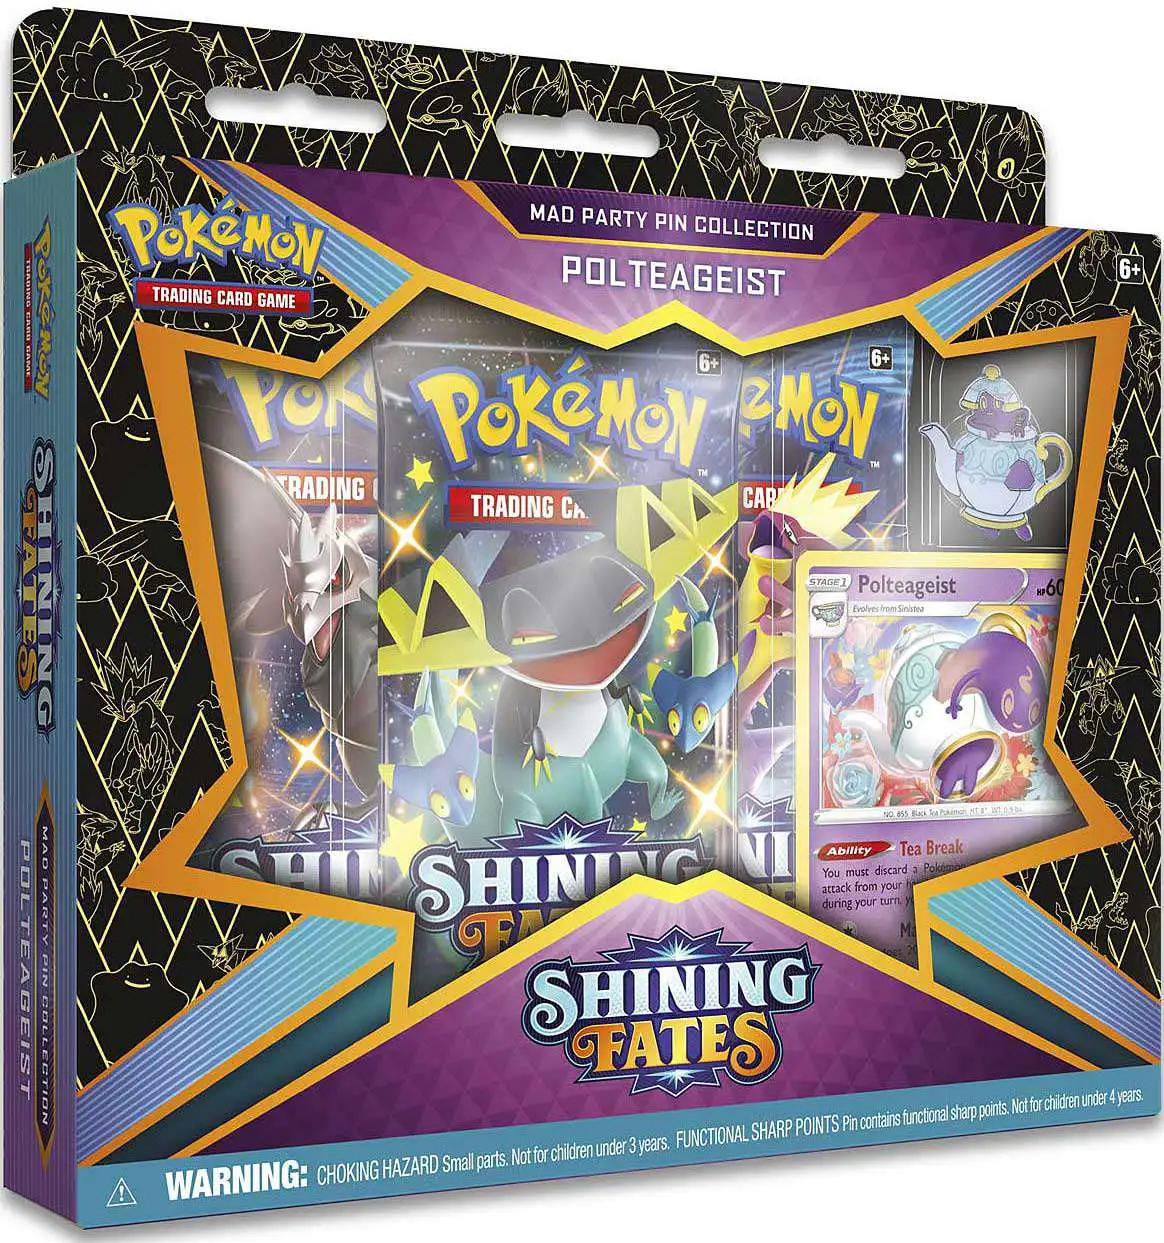 Pokemon Polteageist Mad Party Pin Collection Box 3 Shining Fates Boosters & More 